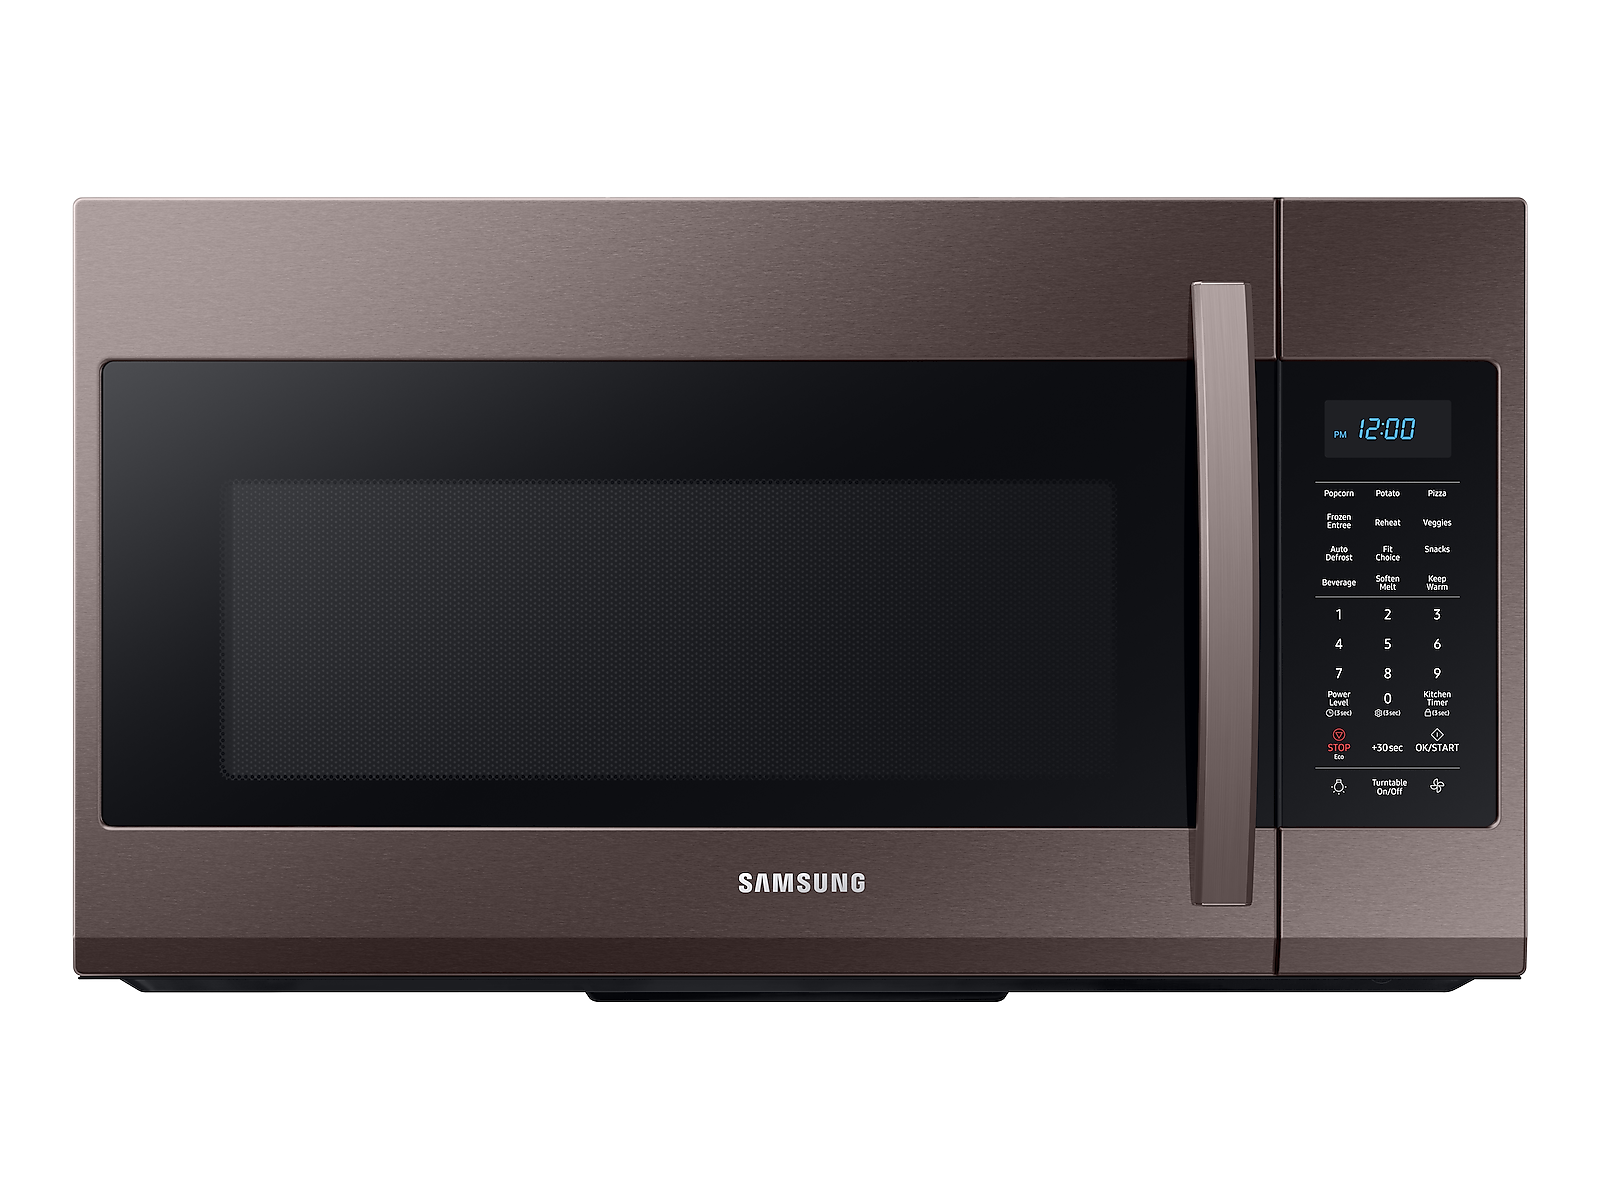 Samsung 1.9 cu. ft. Over-the-Range Microwave with Sensor Cooking in Fingerprint Resistant in Tuscan Stainless Steel(ME19R7041FT/AA)